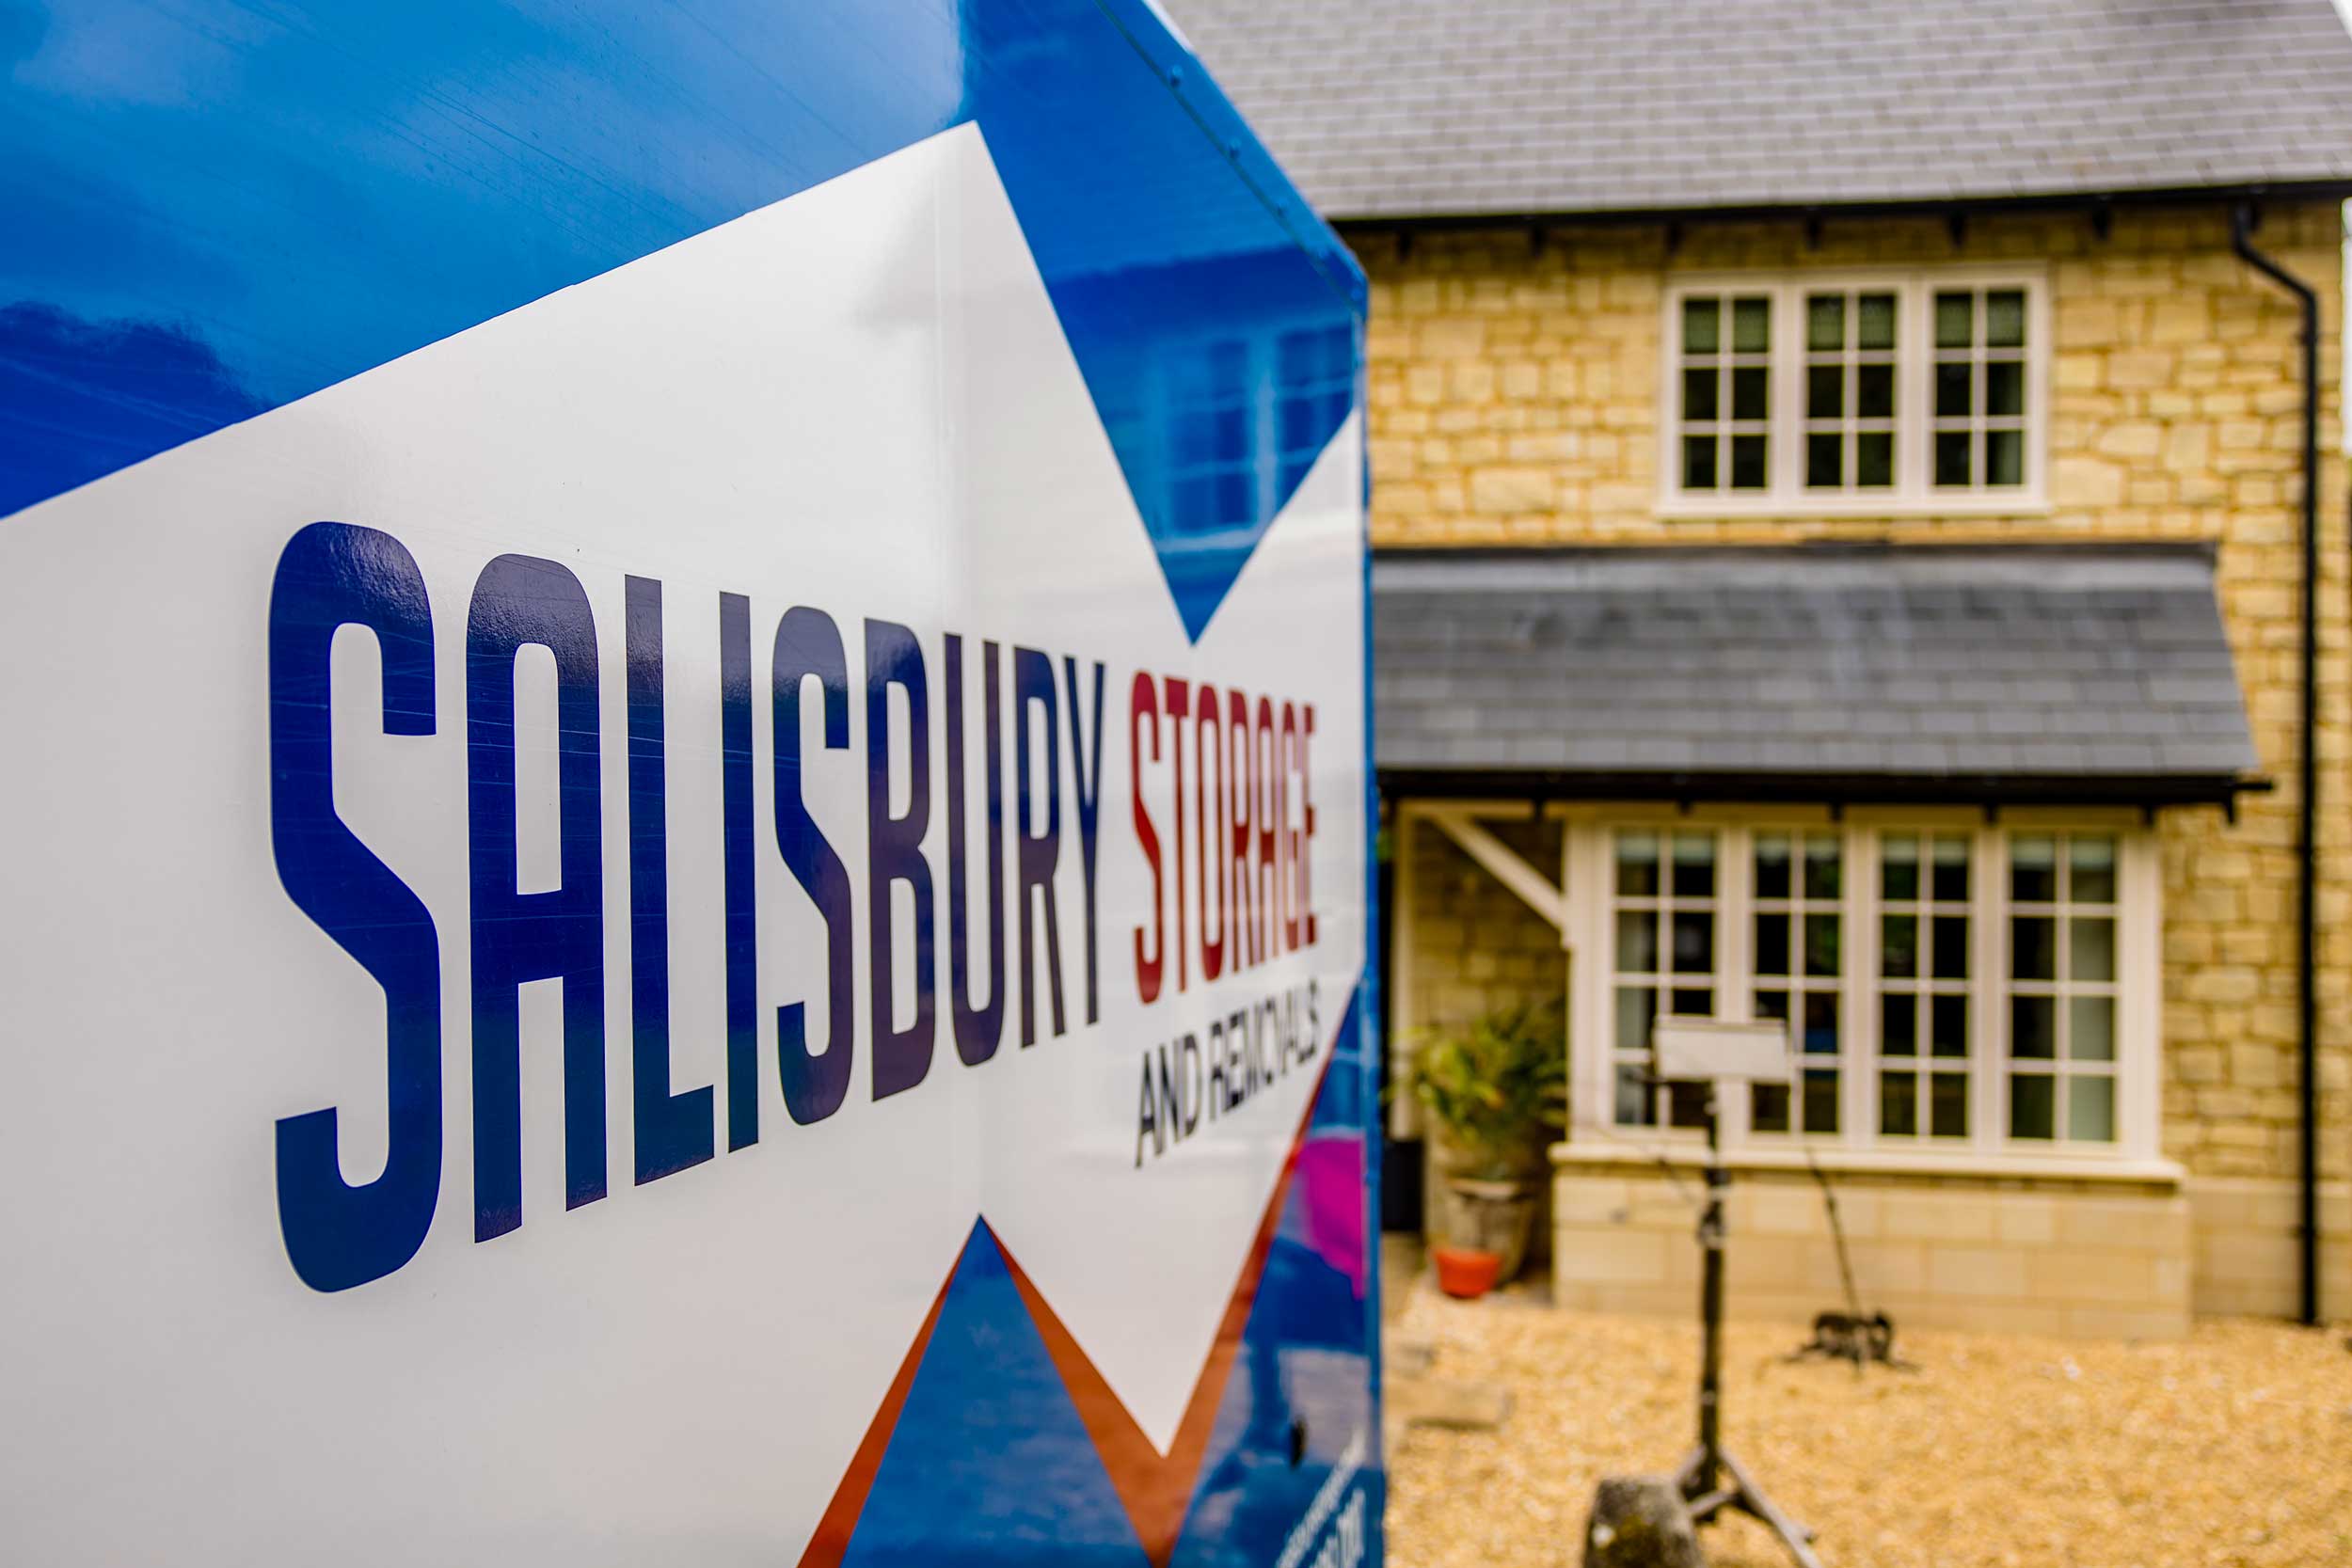 Close up of the logo on the side of a salisbury storage and removals van with a residential property in the background.